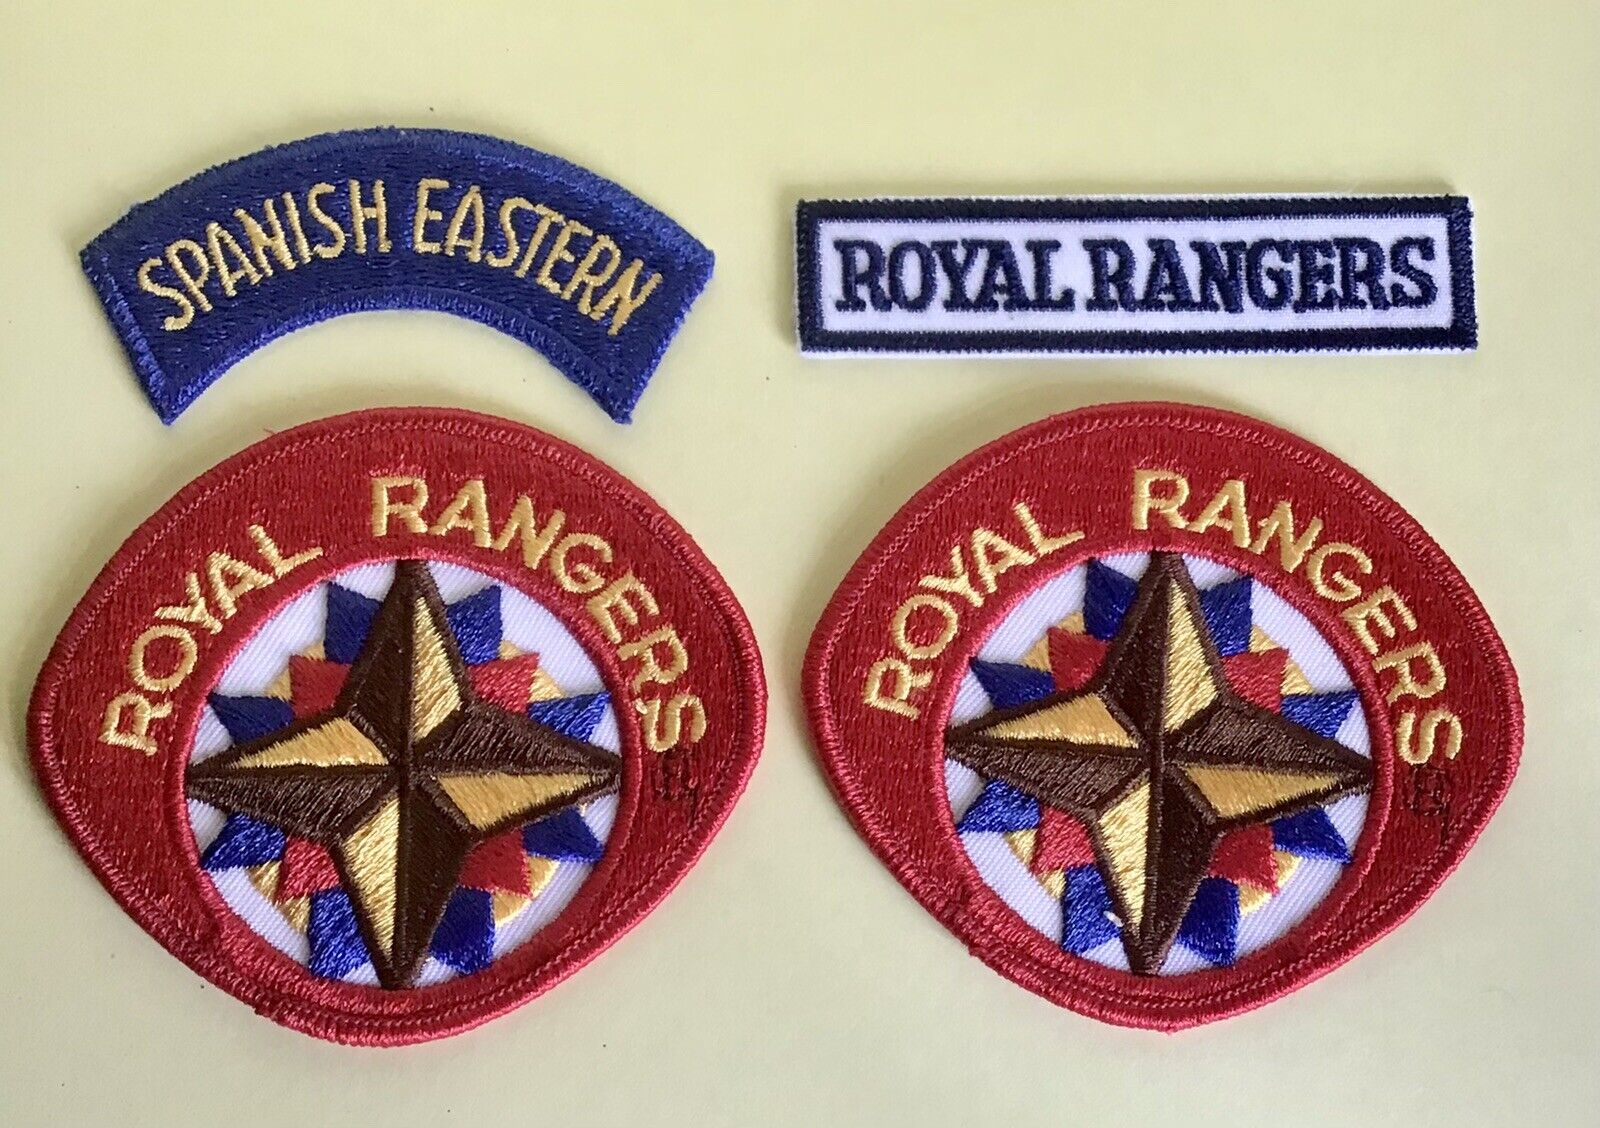 Vintage Royal Rangers Spanish Eastern Patch Lot Mint Condition